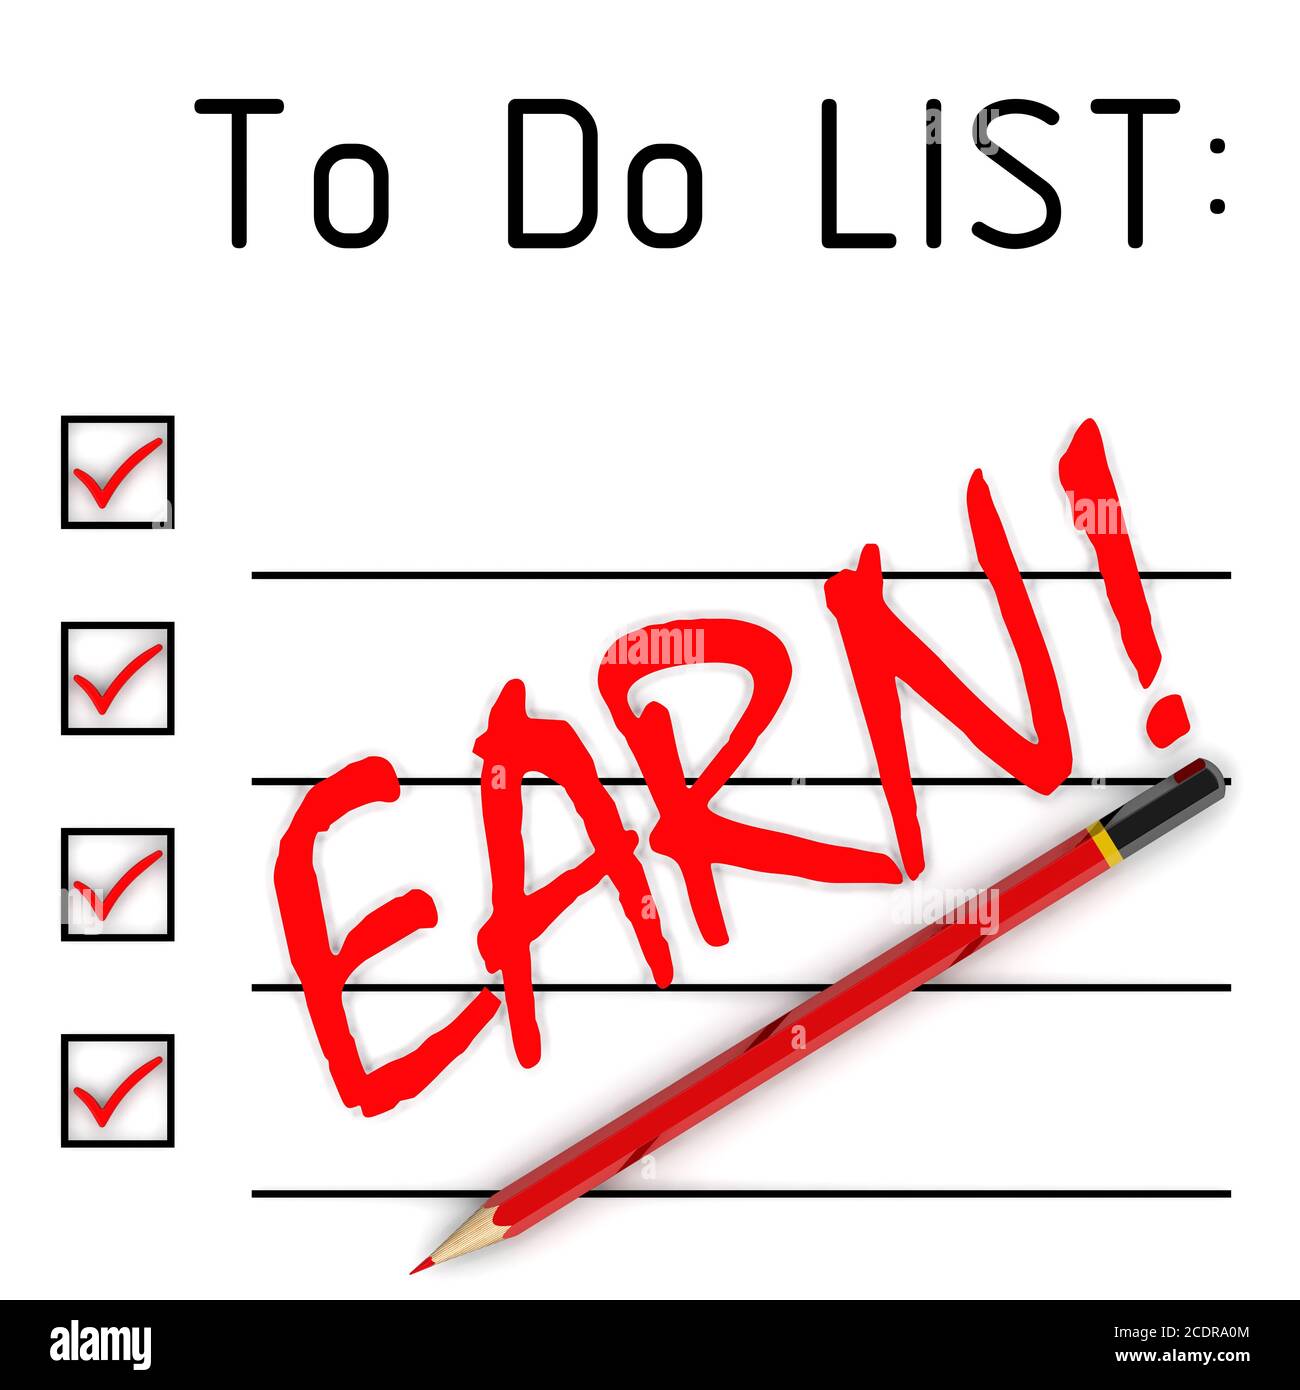 Need to earn. Red pencil and large red word EARN! in to do list Stock Photo